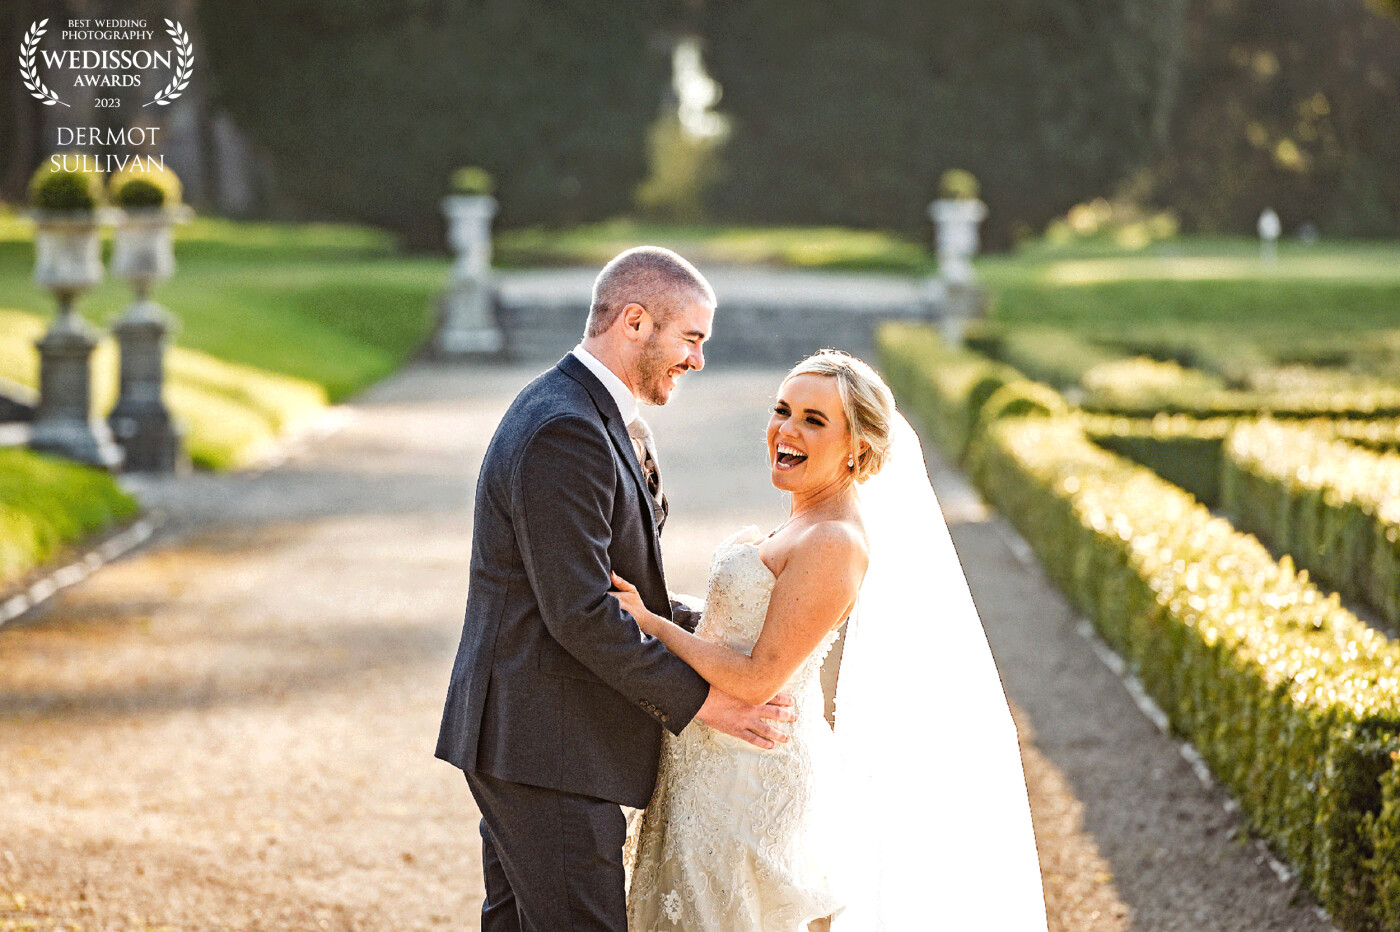 This photograph was taken at Castlemartyr Hotel in Cork, on a lovely sunny afternoon in March. The location was beautiful and my couple were really great to work with. I positioned them with the sun behind and shot from a slightly raised position on some steps.